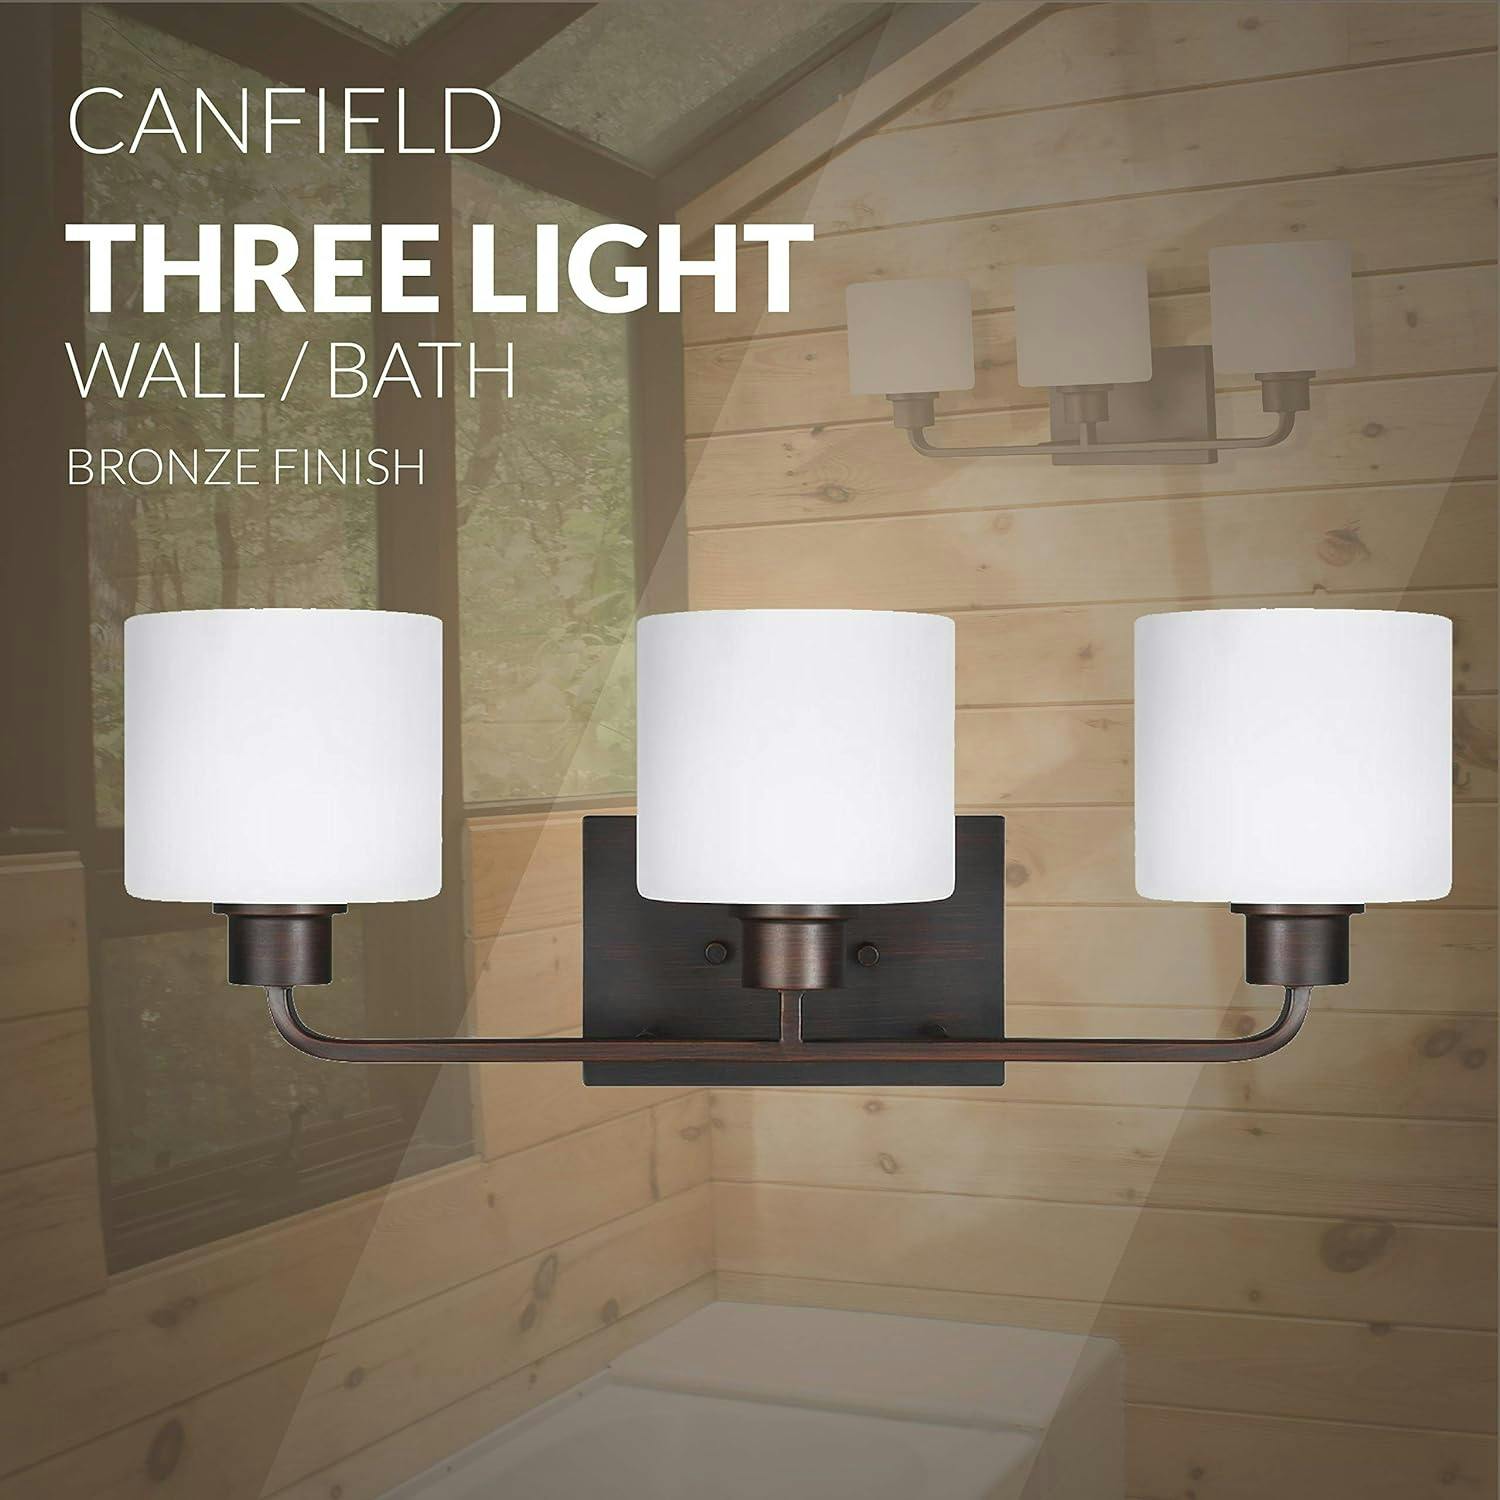 Canfield 3-Light Bronze Wall/Bath Fixture with Etched White Glass